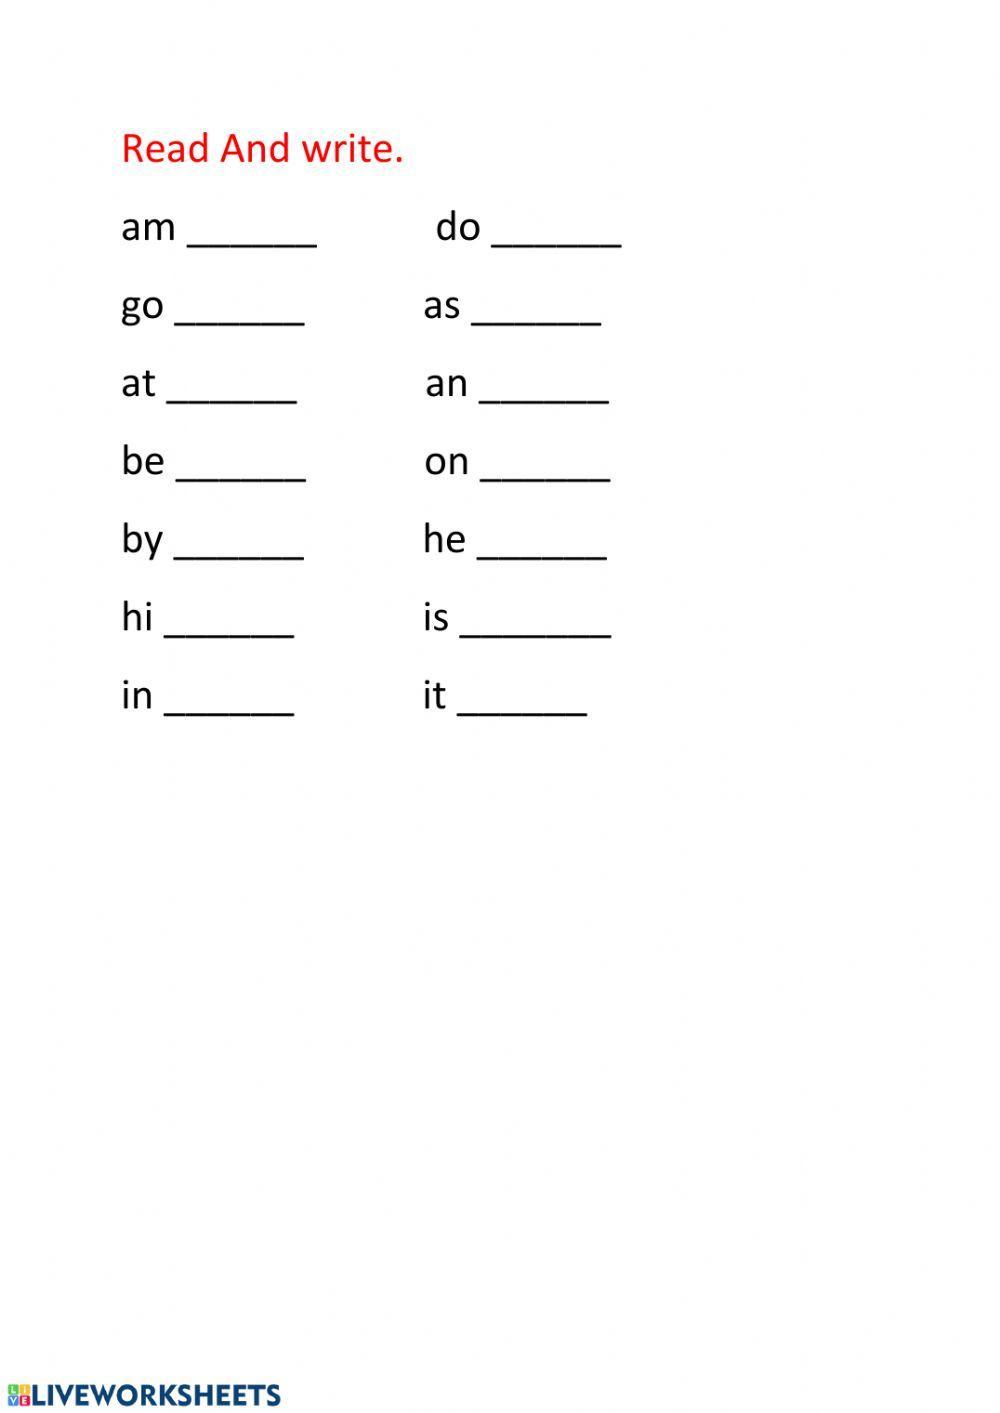 A tw Spelling List Worksheets